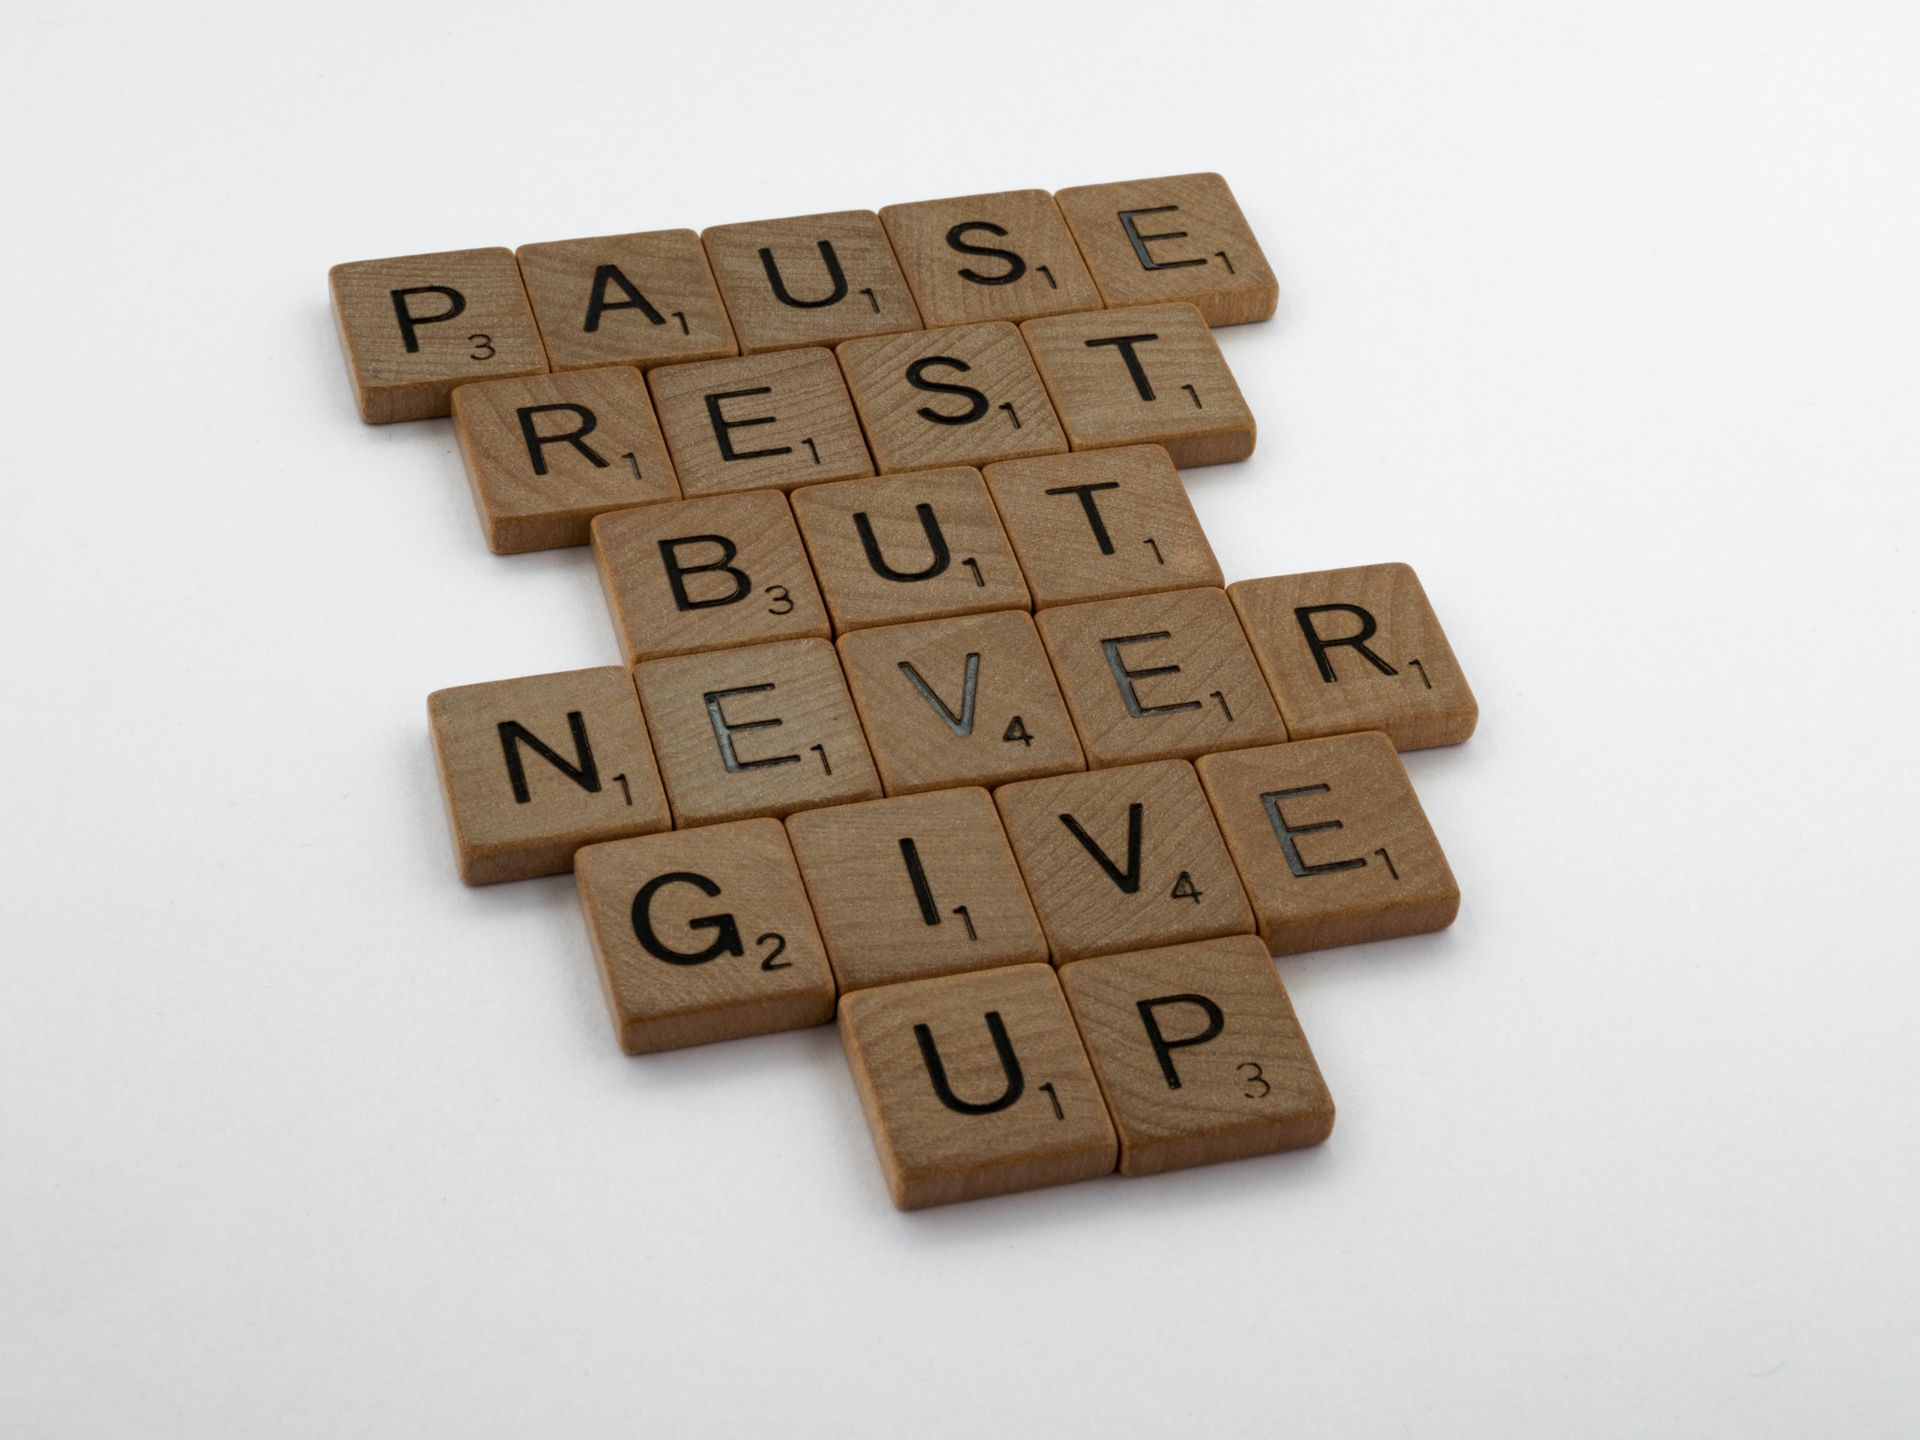 Pause, rest, but never give up image